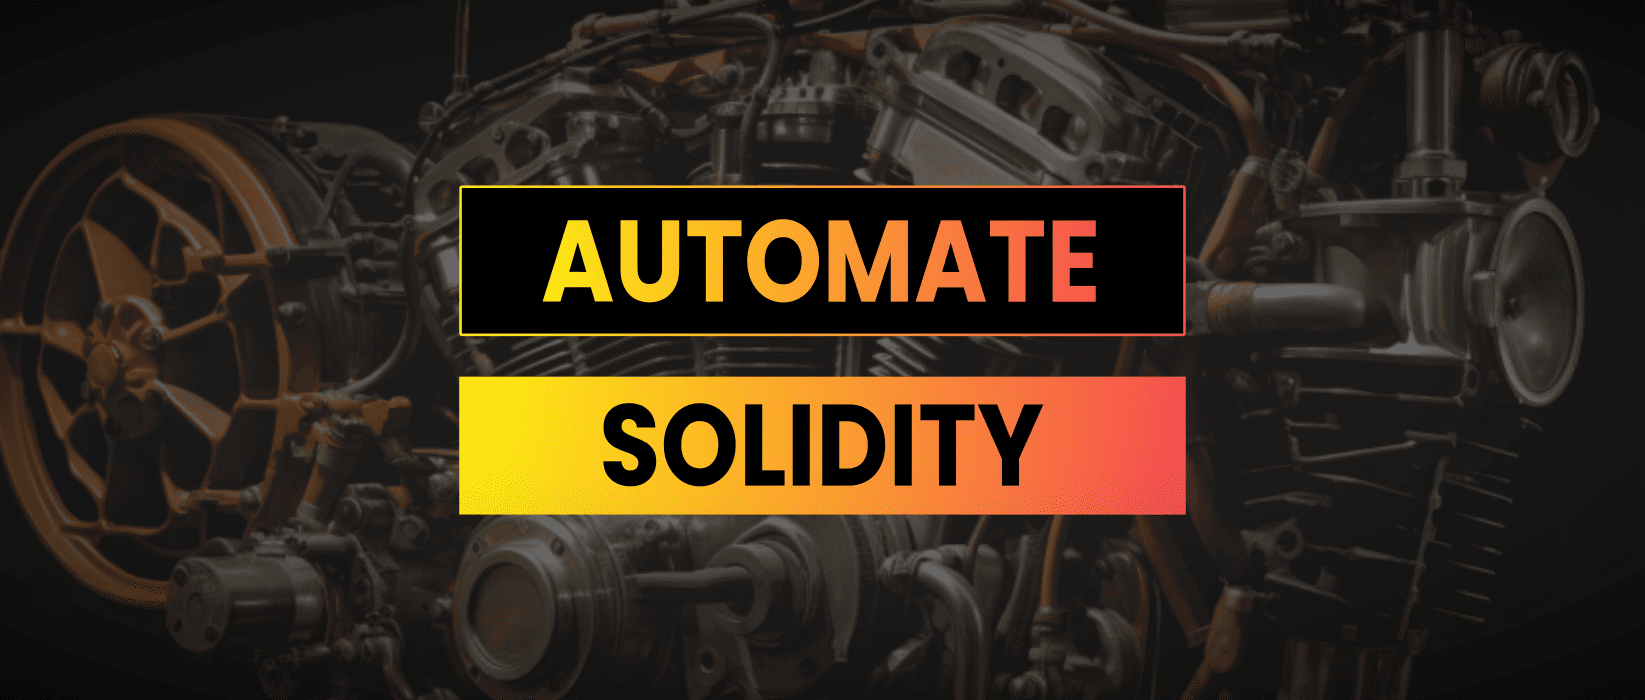 Automate Solidity